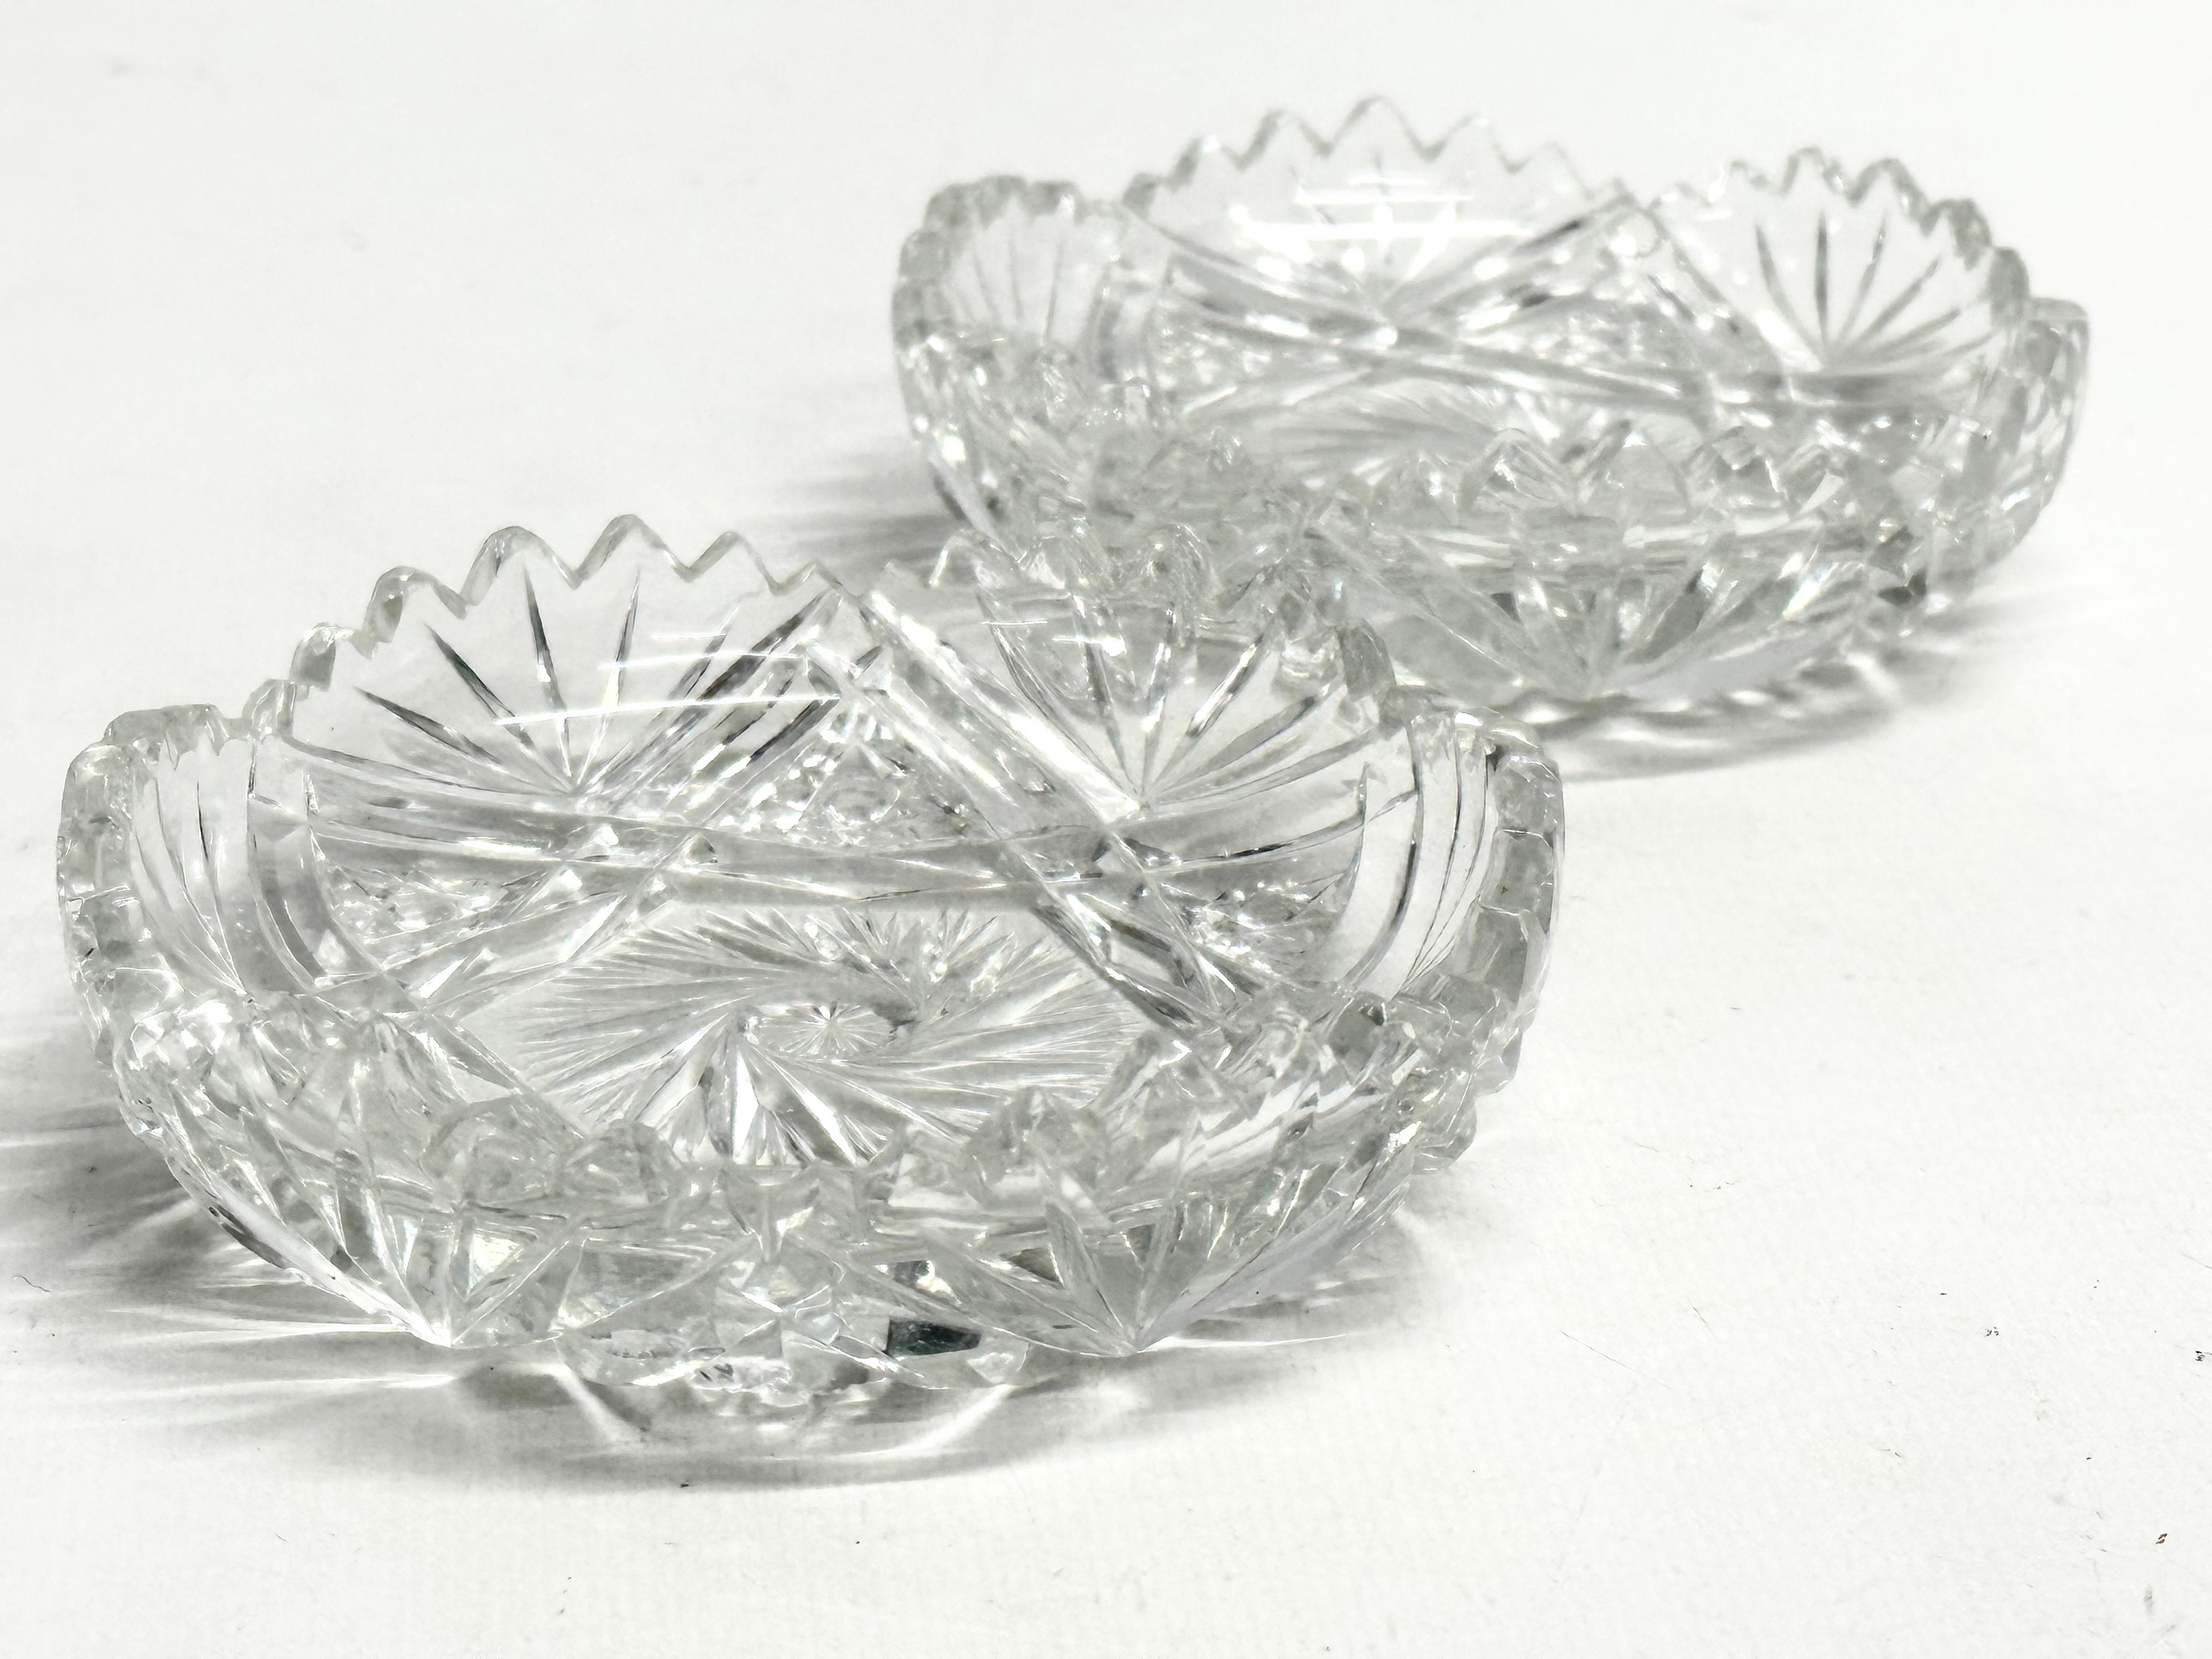 3 Mid 20th Century good quality cut glass dishes with scalloped rims. 10.5cm - Image 3 of 3